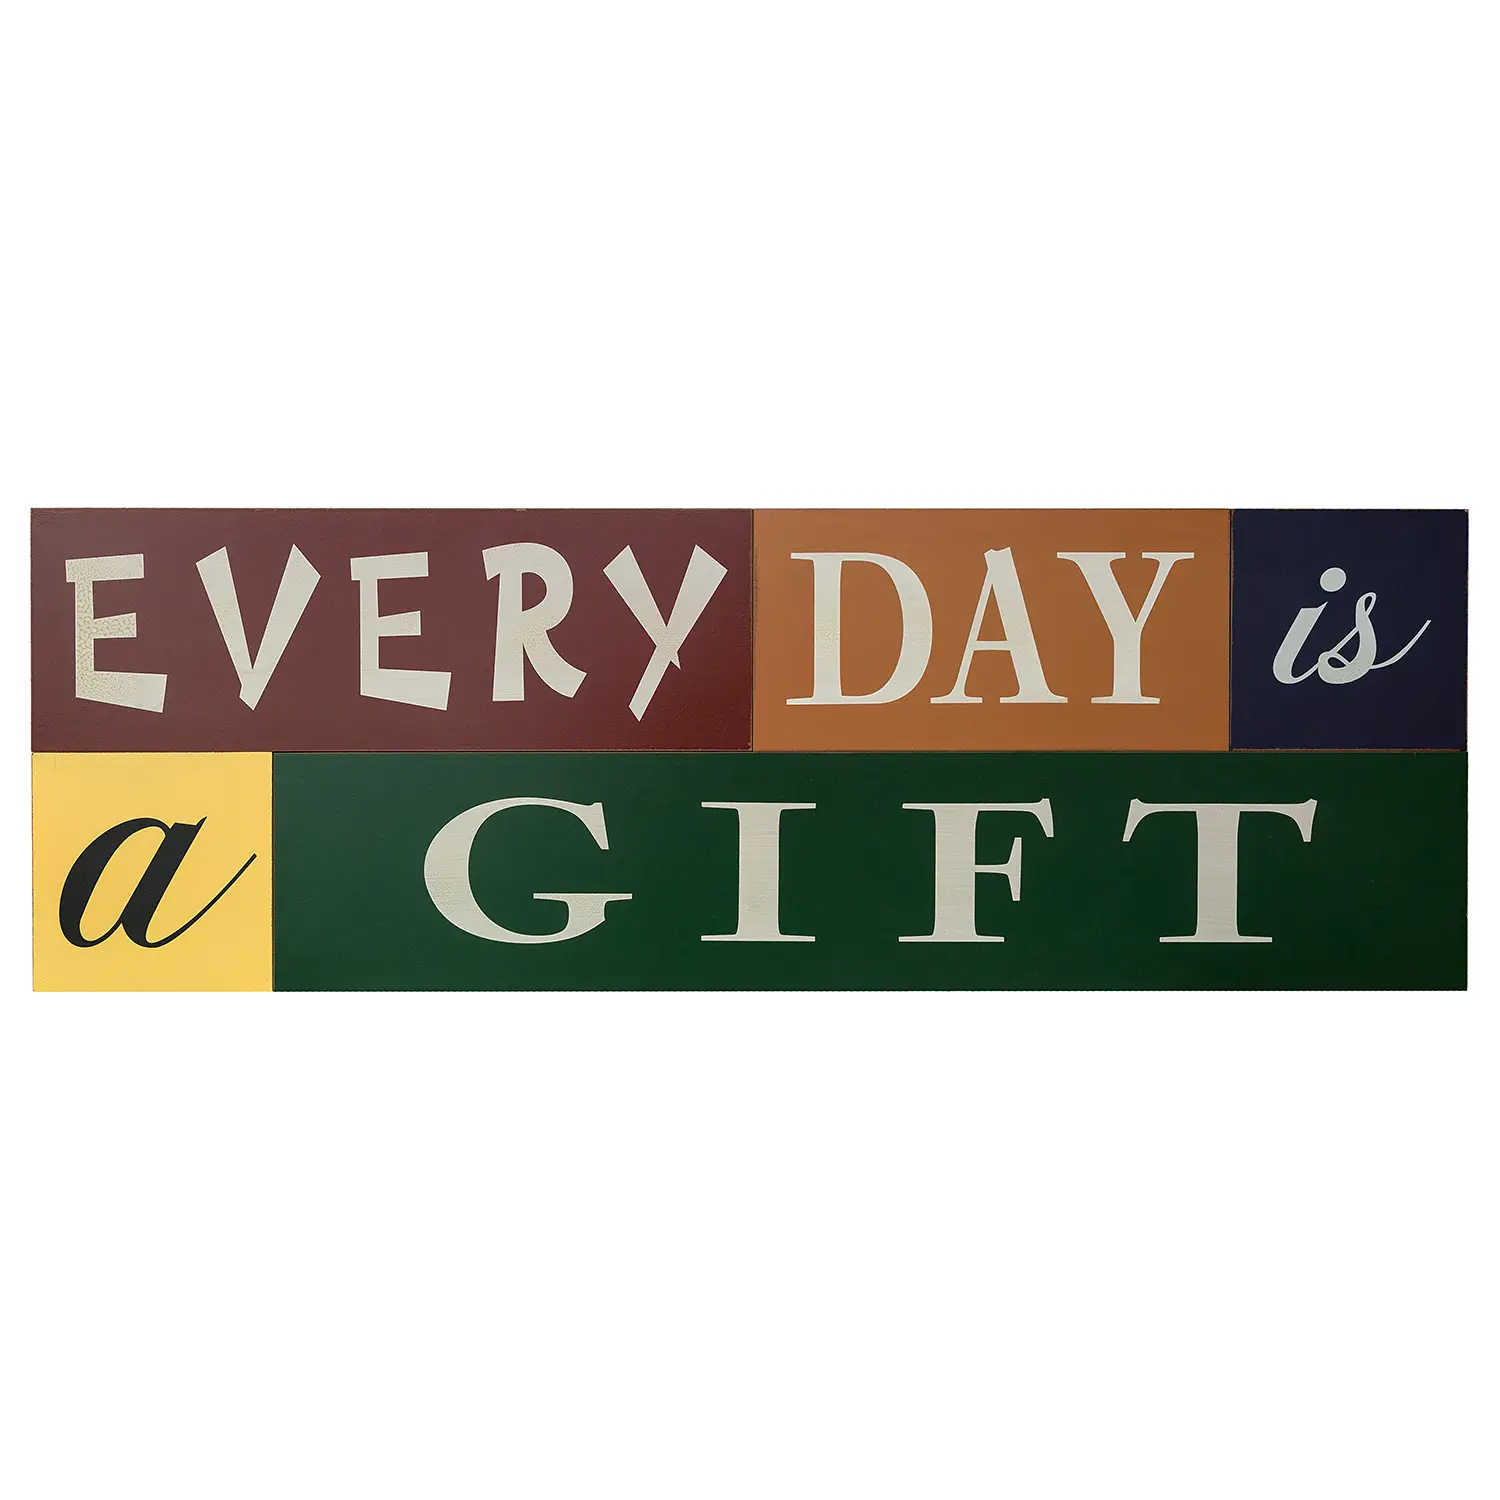 is Every Spruchtafel day a gift